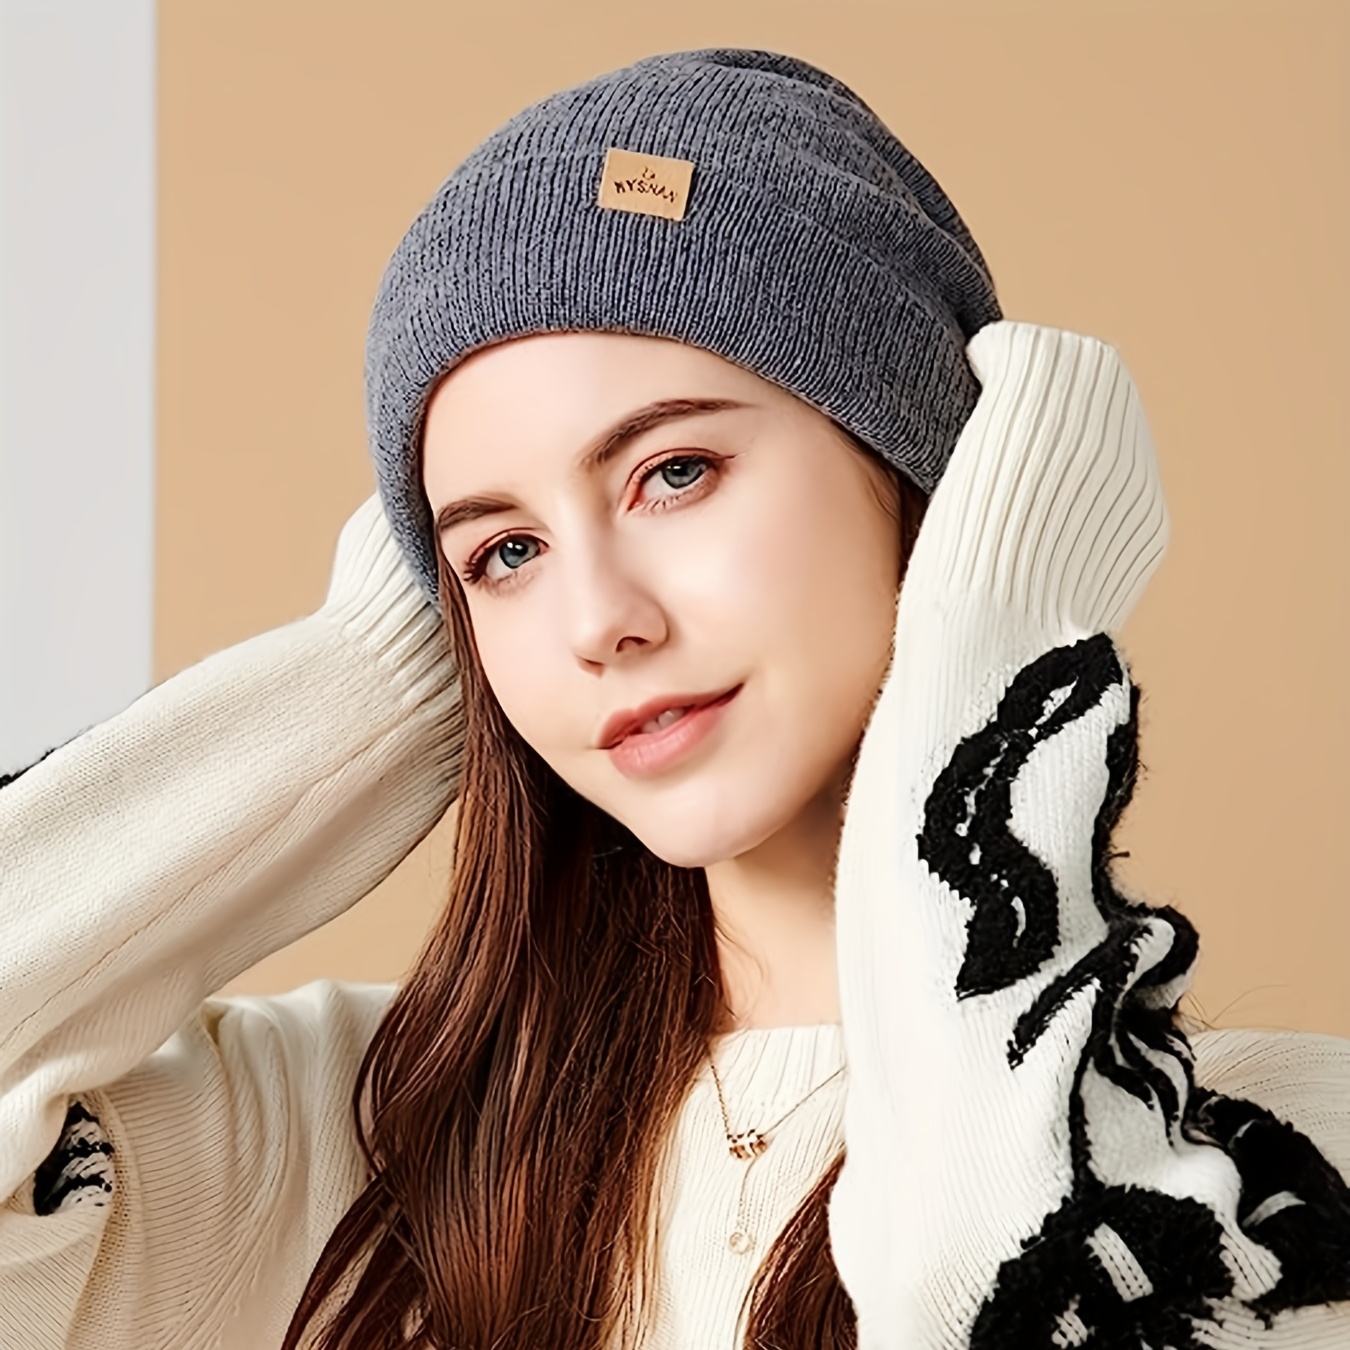 Stay warm with Elle Double Knit Beanie and Scarf